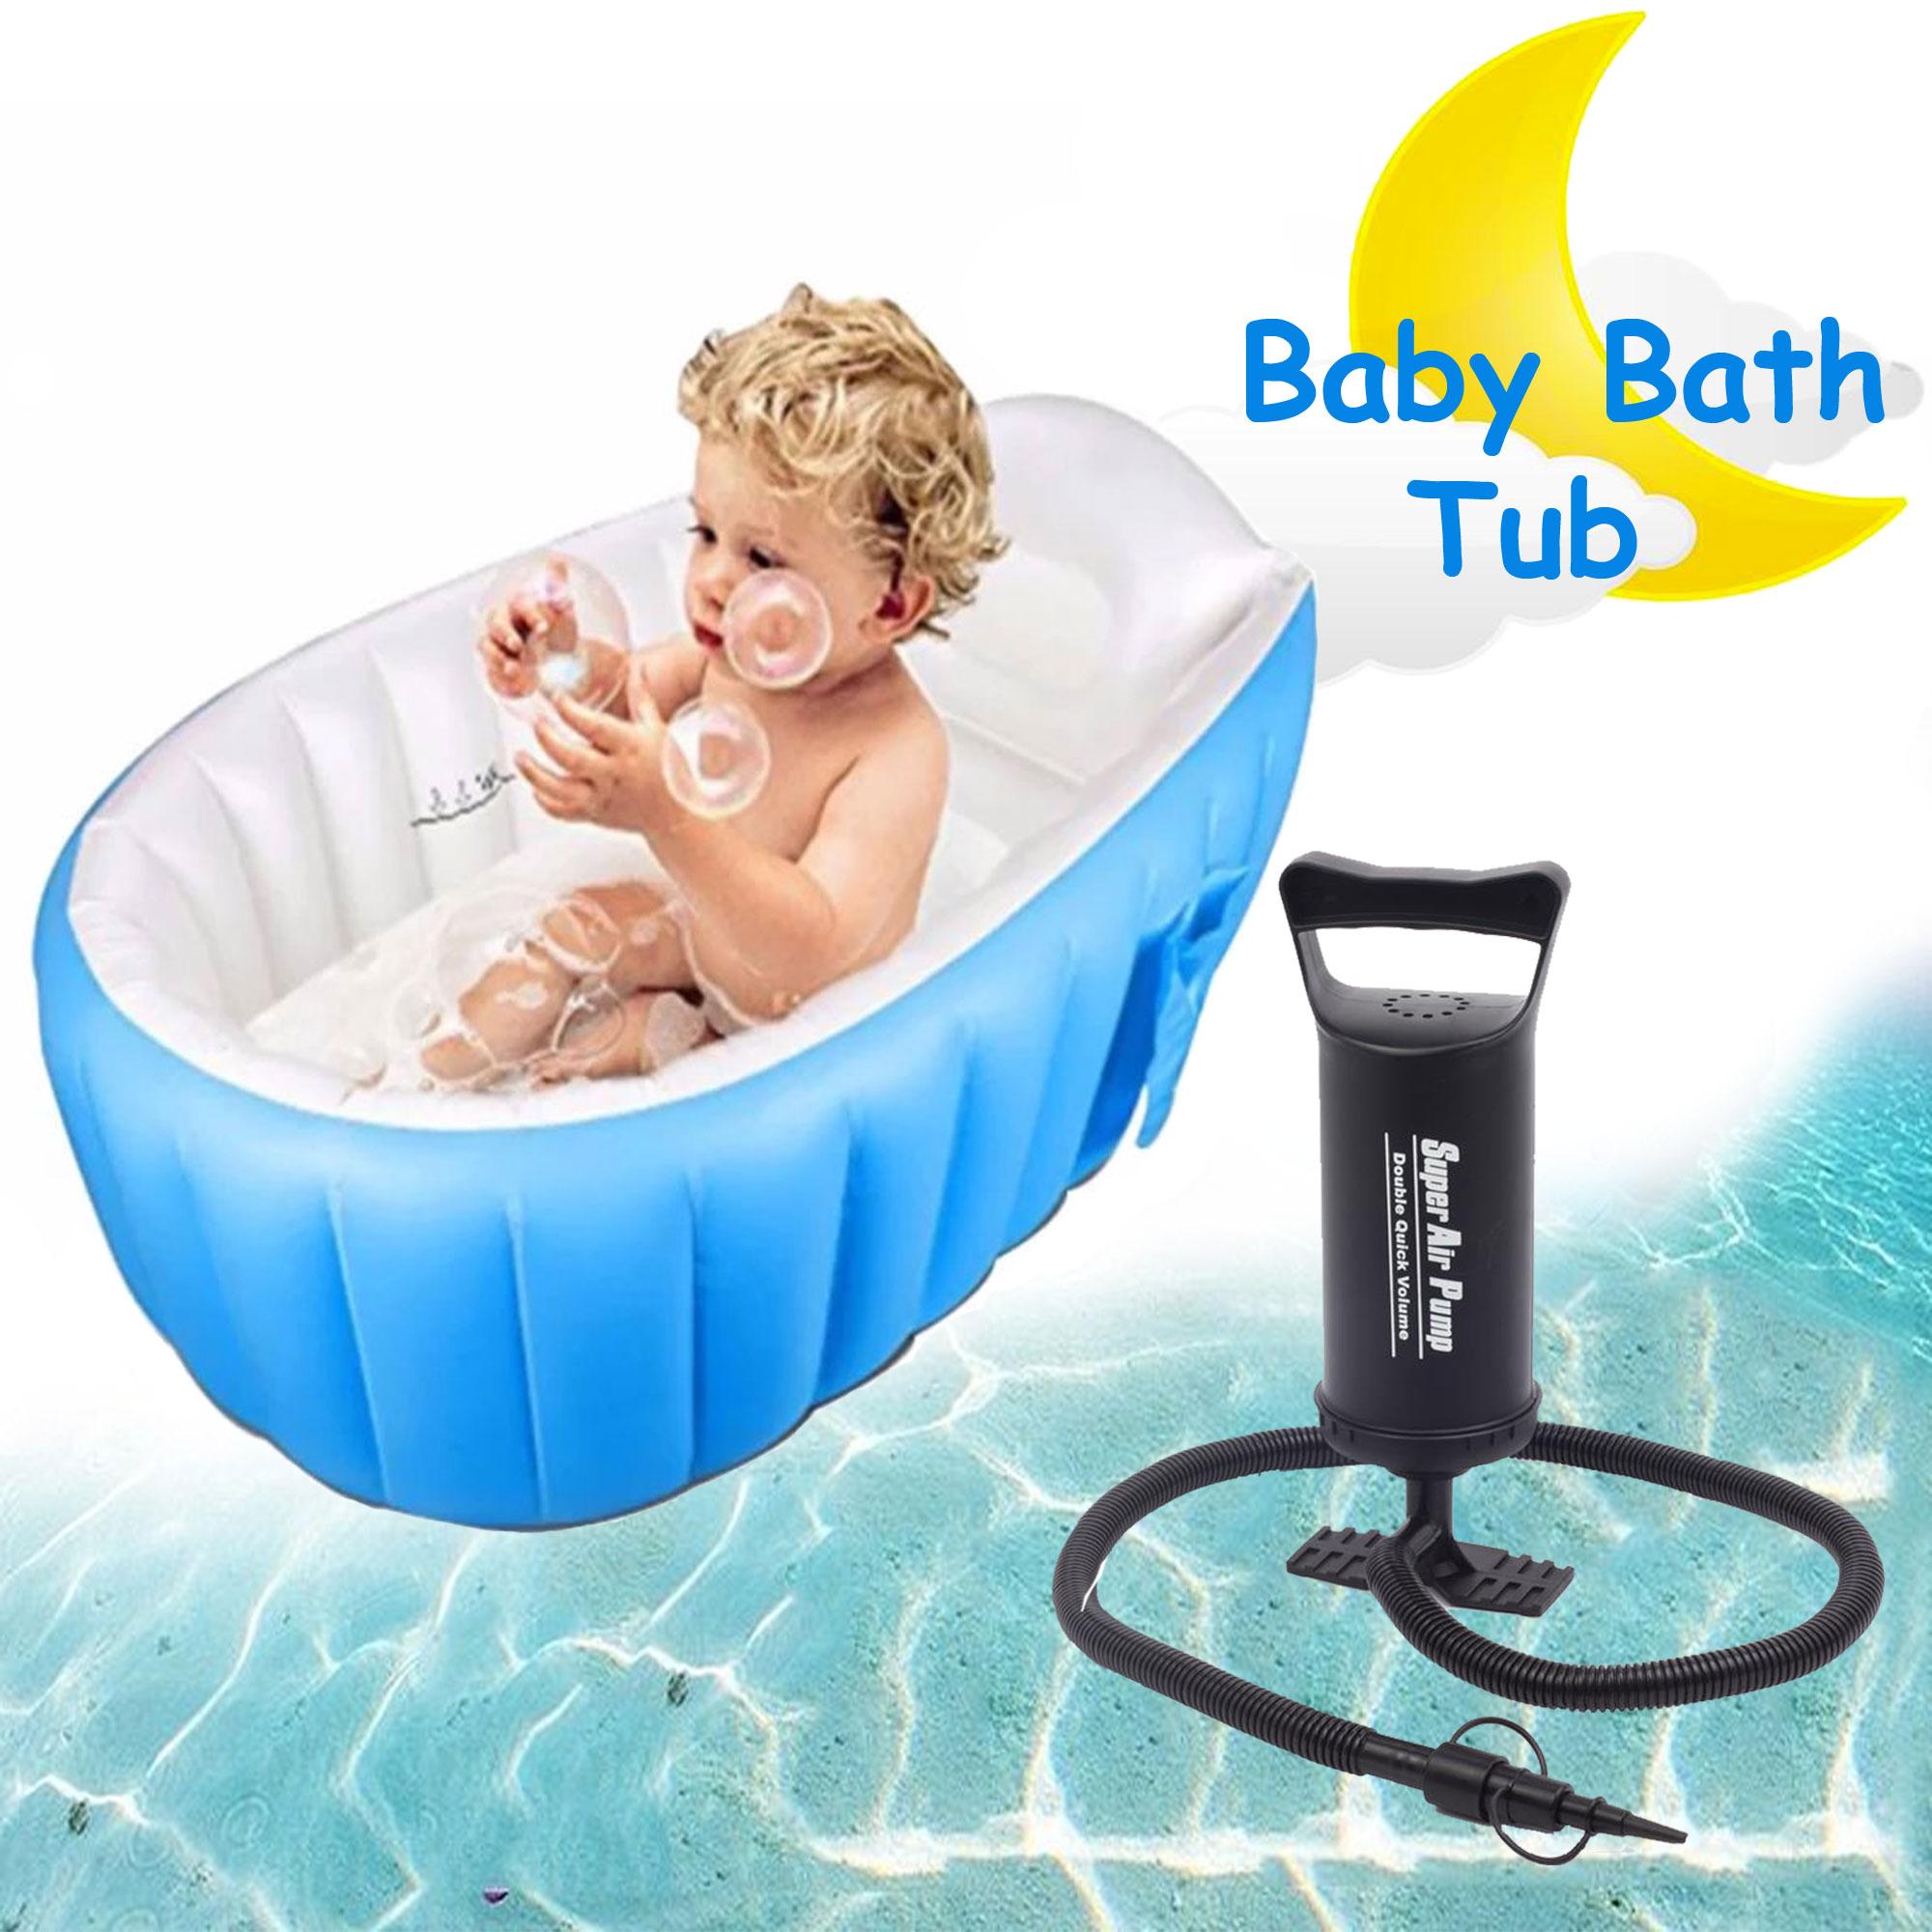 Yt 226a Inflatable Baby Bath Tub Blue With Free Hs 112 Twoway Airpump Black